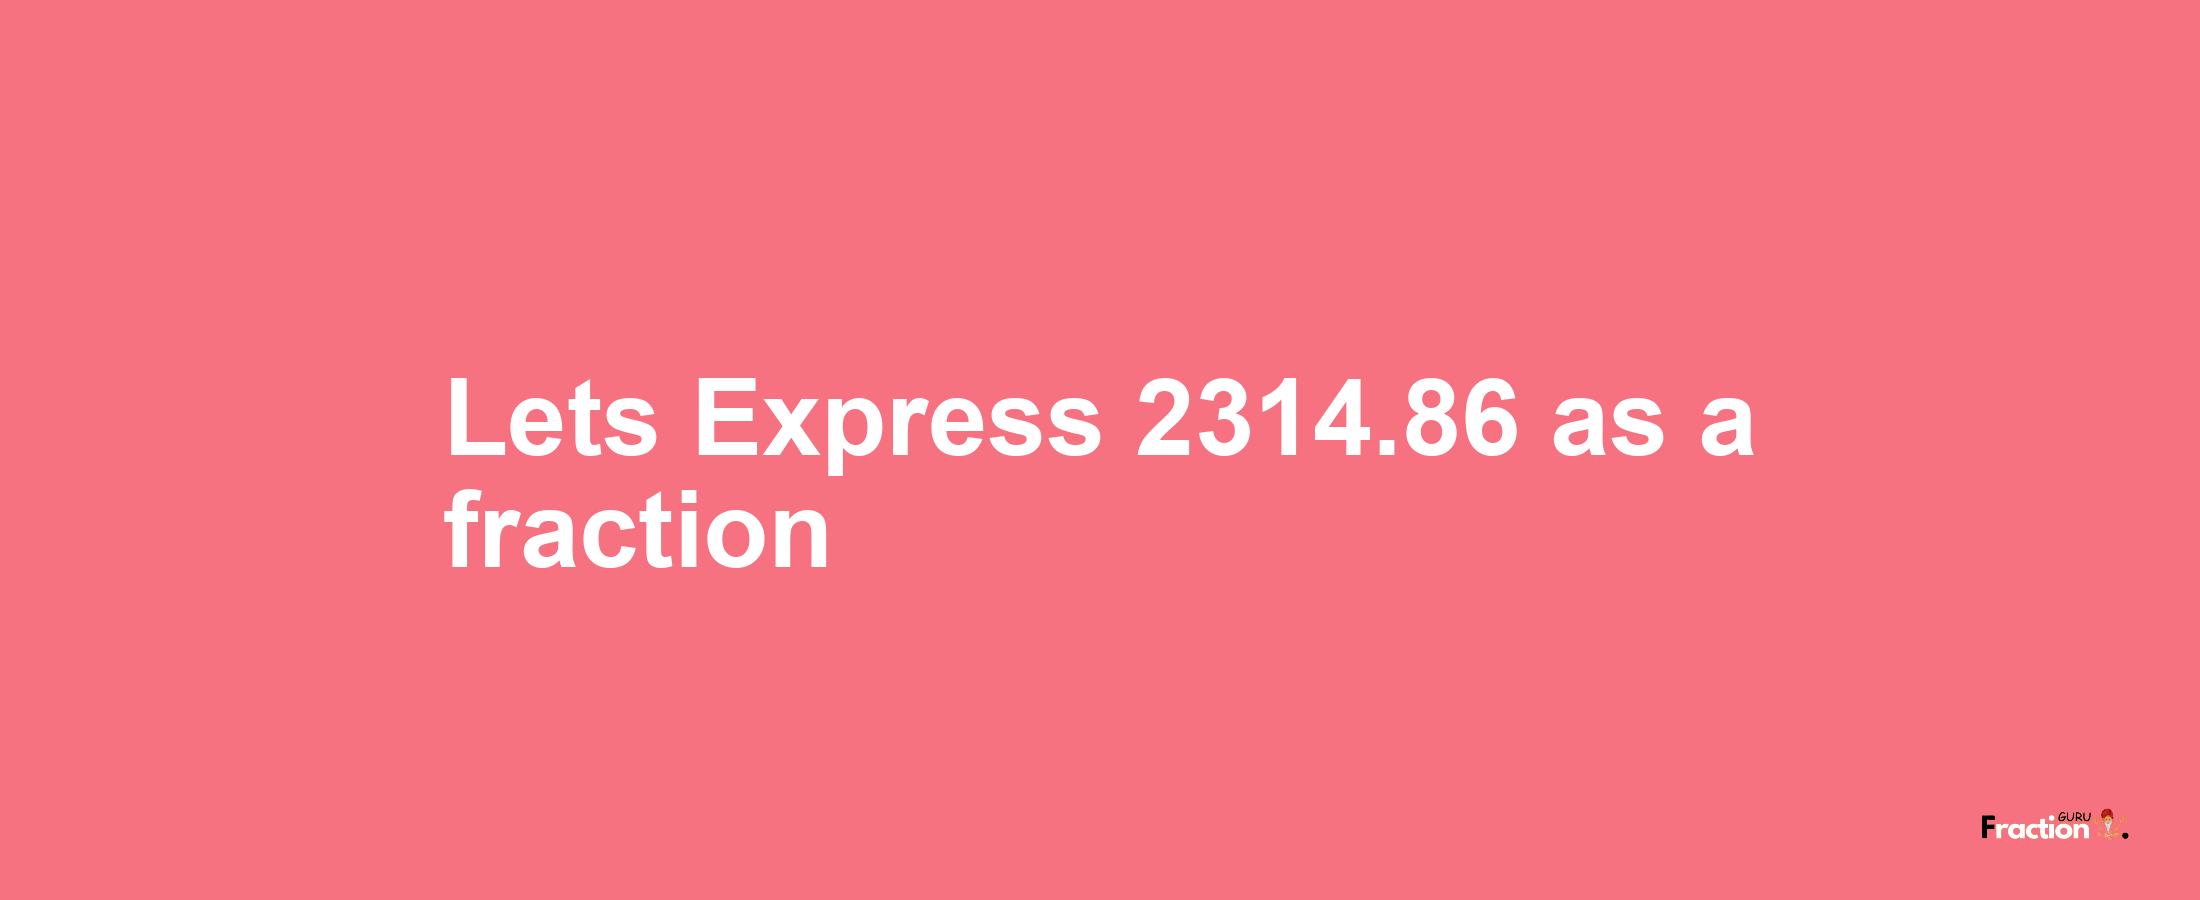 Lets Express 2314.86 as afraction